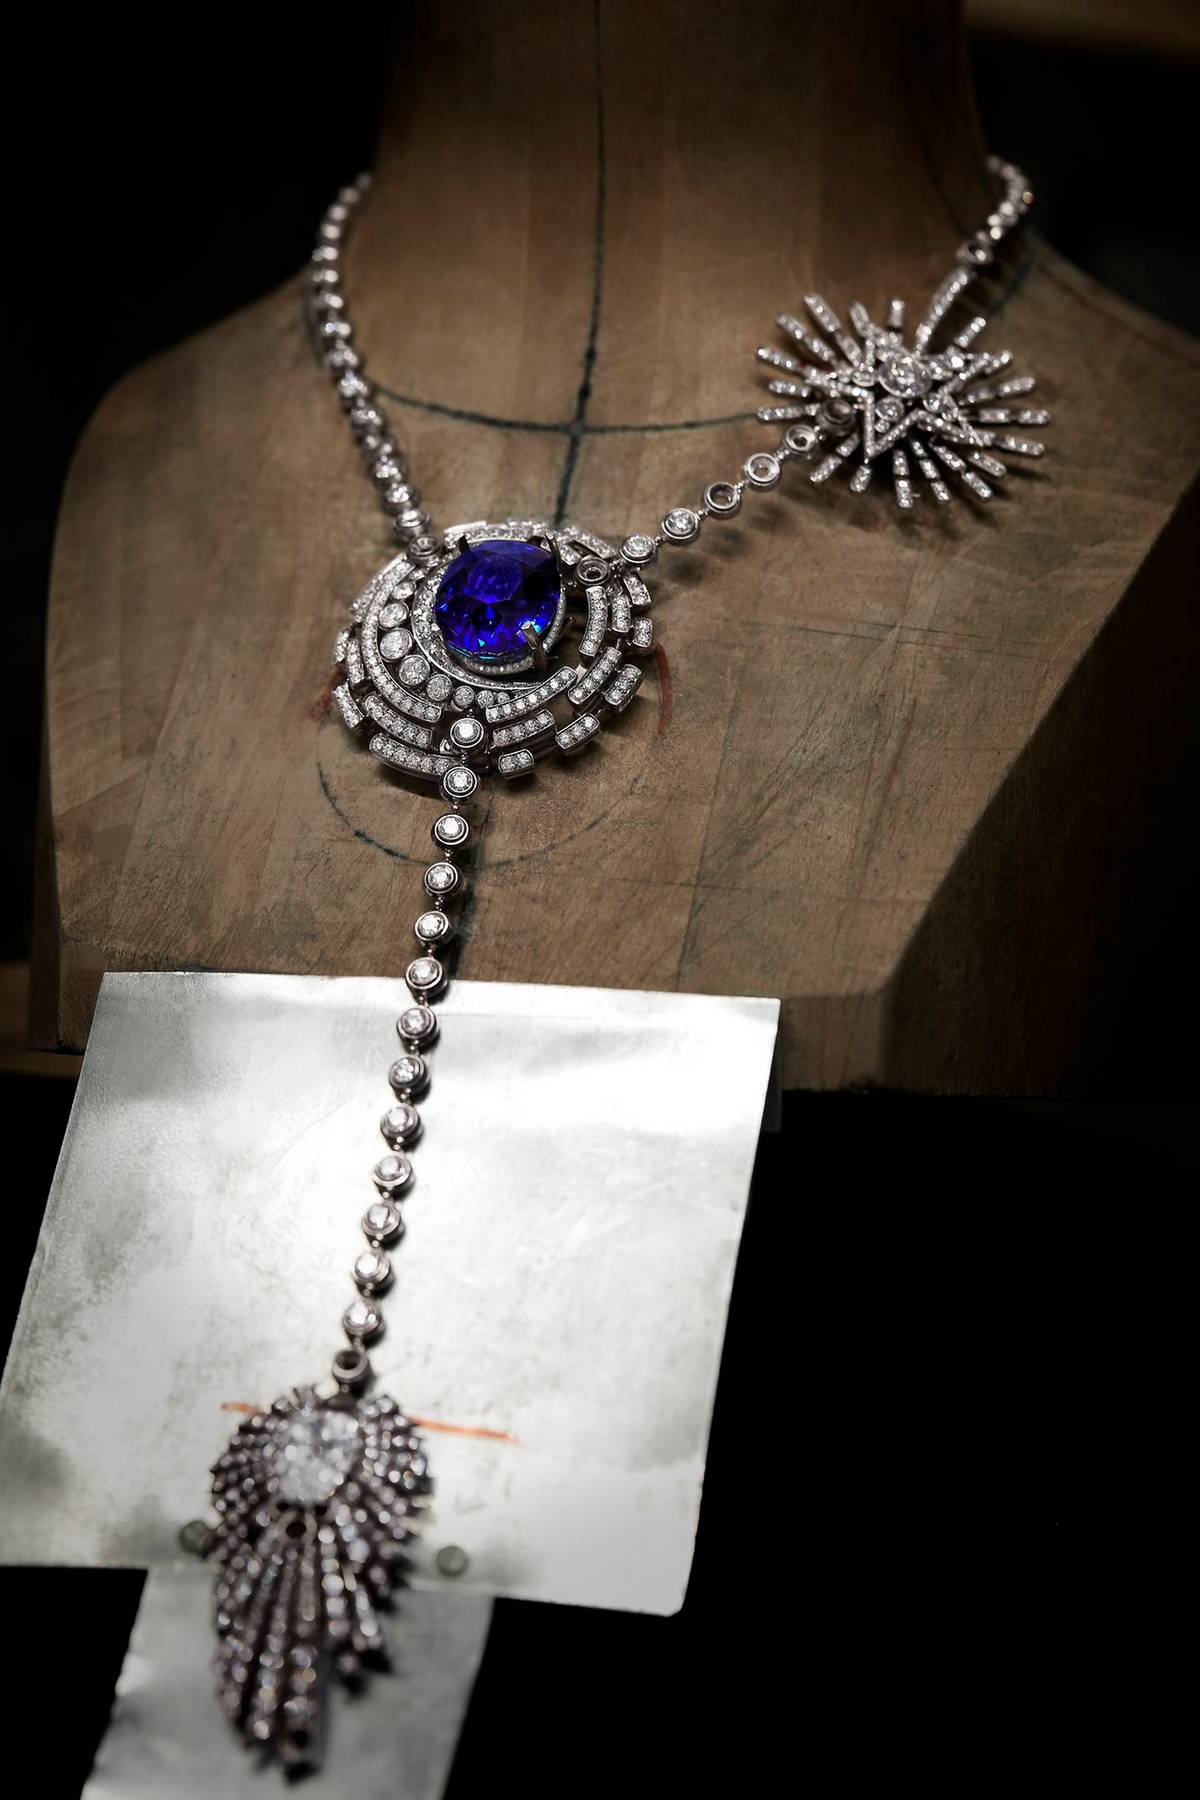 Chanel is celebrating 90 years of high jewelry making with its new